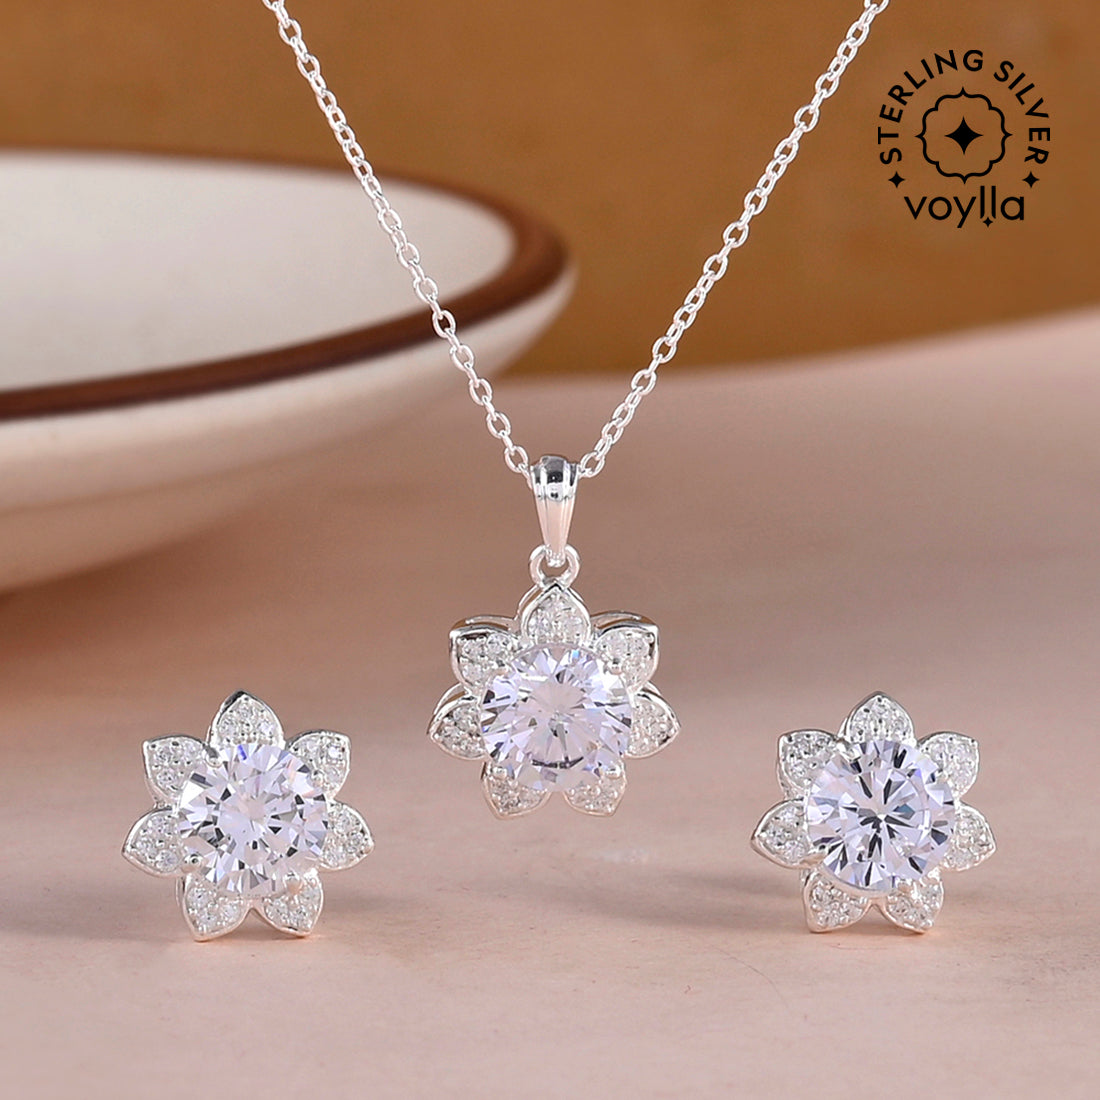 Women's Floral Style 925 Sterling Silver Set - Voylla